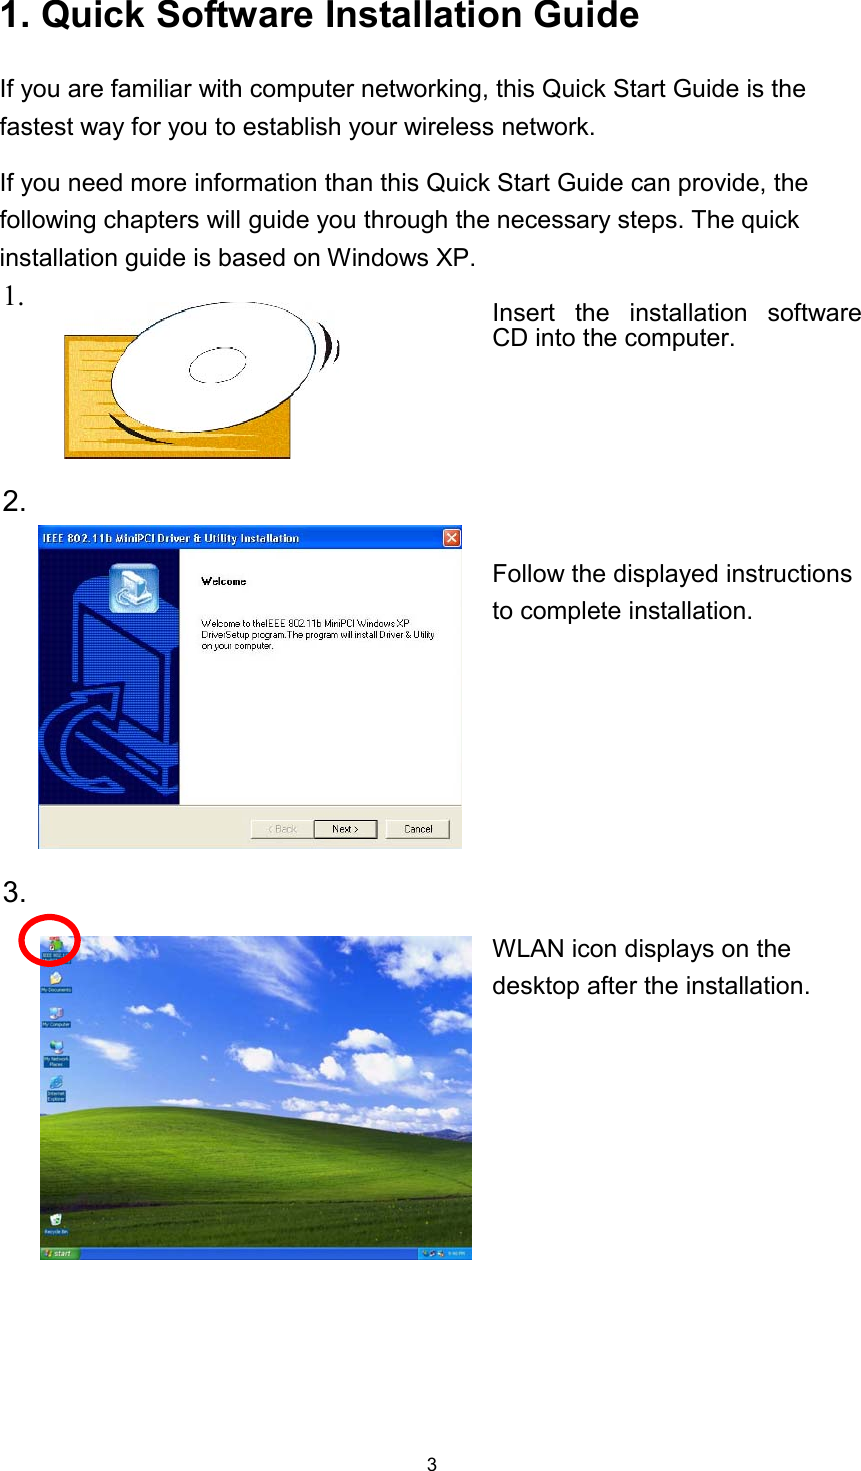  31. Quick Software Installation Guide If you are familiar with computer networking, this Quick Start Guide is the fastest way for you to establish your wireless network. If you need more information than this Quick Start Guide can provide, the following chapters will guide you through the necessary steps. The quick installation guide is based on Windows XP. 1.   Insert the installation software CD into the computer. 2.  Follow the displayed instructions to complete installation. 3.  WLAN icon displays on the desktop after the installation. 